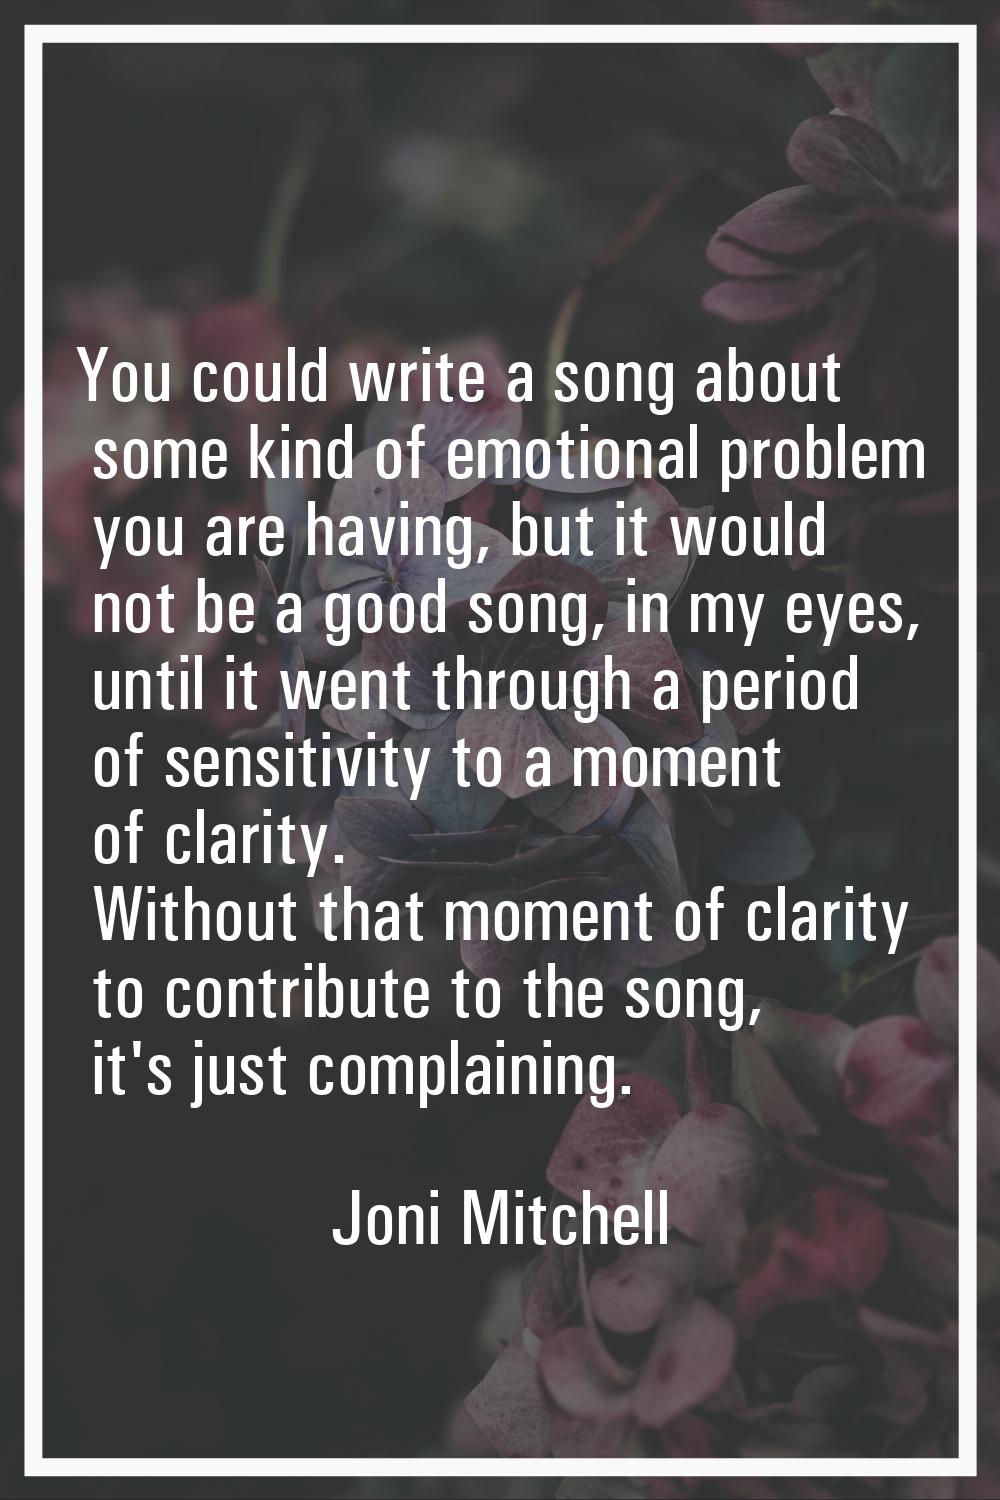 You could write a song about some kind of emotional problem you are having, but it would not be a g